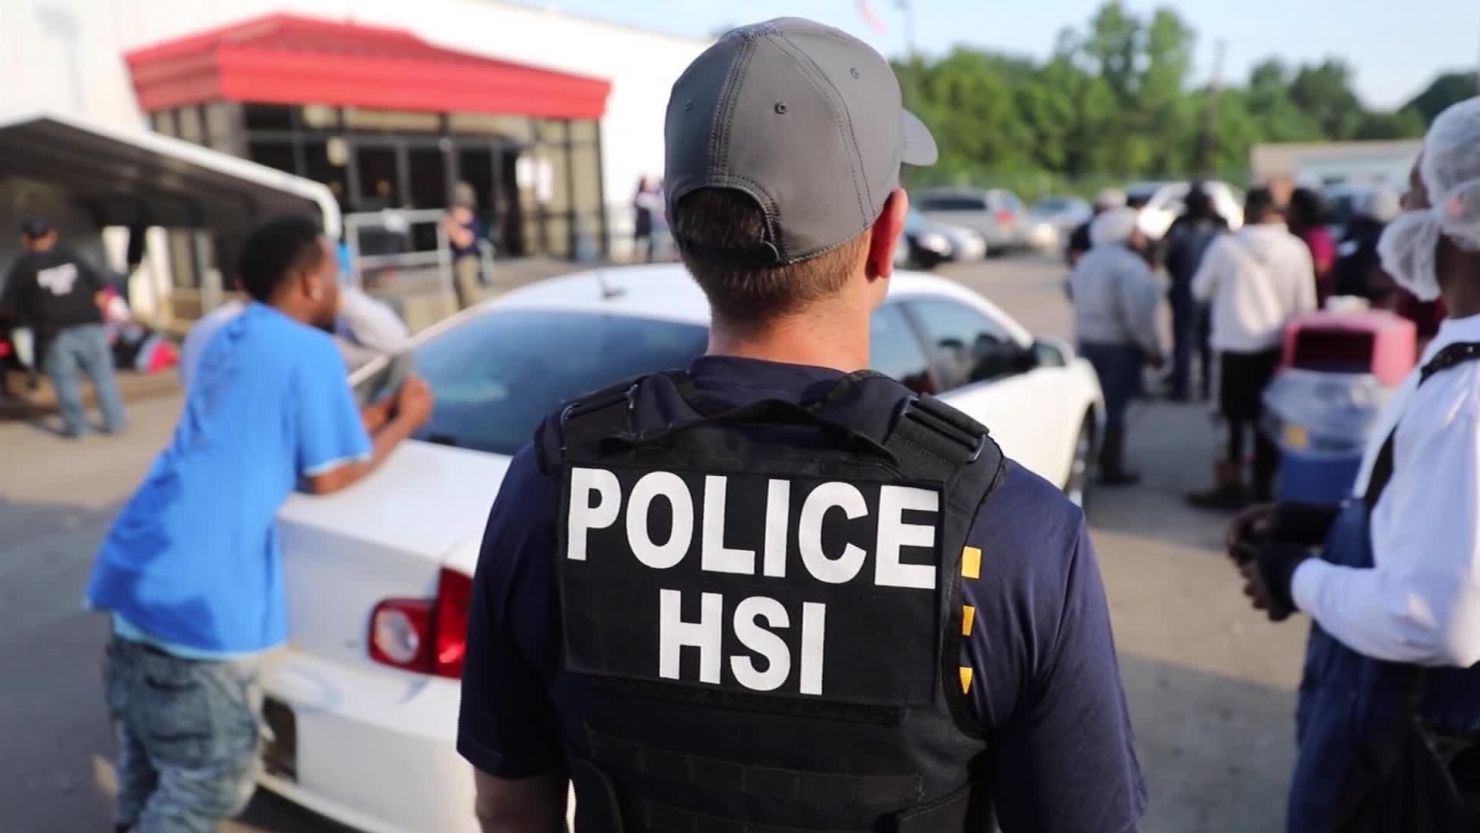 Four employees at Mississippi food processing plants were indicted after historic immigration raids on August 7, 2019, officials say. 